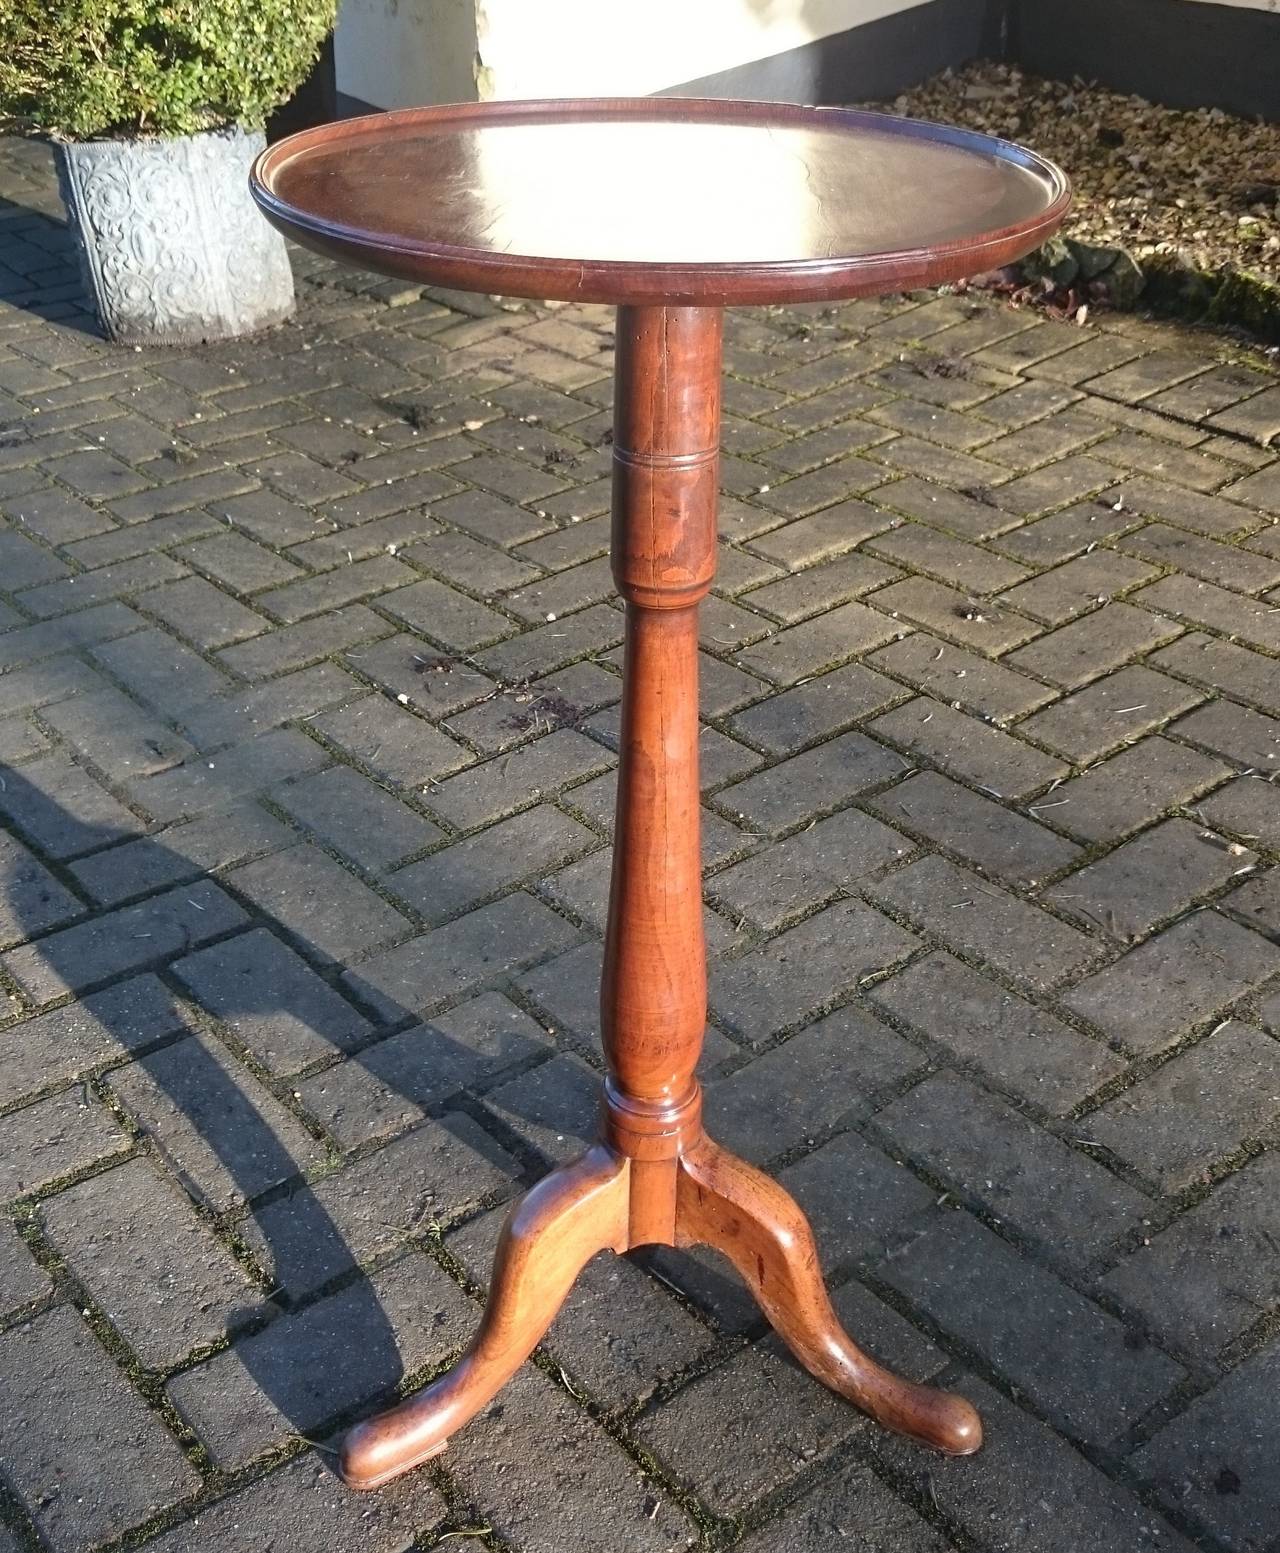 Antique yew wood tripod table / lamp table / wine table. To those in the know this timber needs no introduction. Yew wood has a unique way that its fine grain lines fade to a deep golden colour with the passage of time. 

English circa 1810